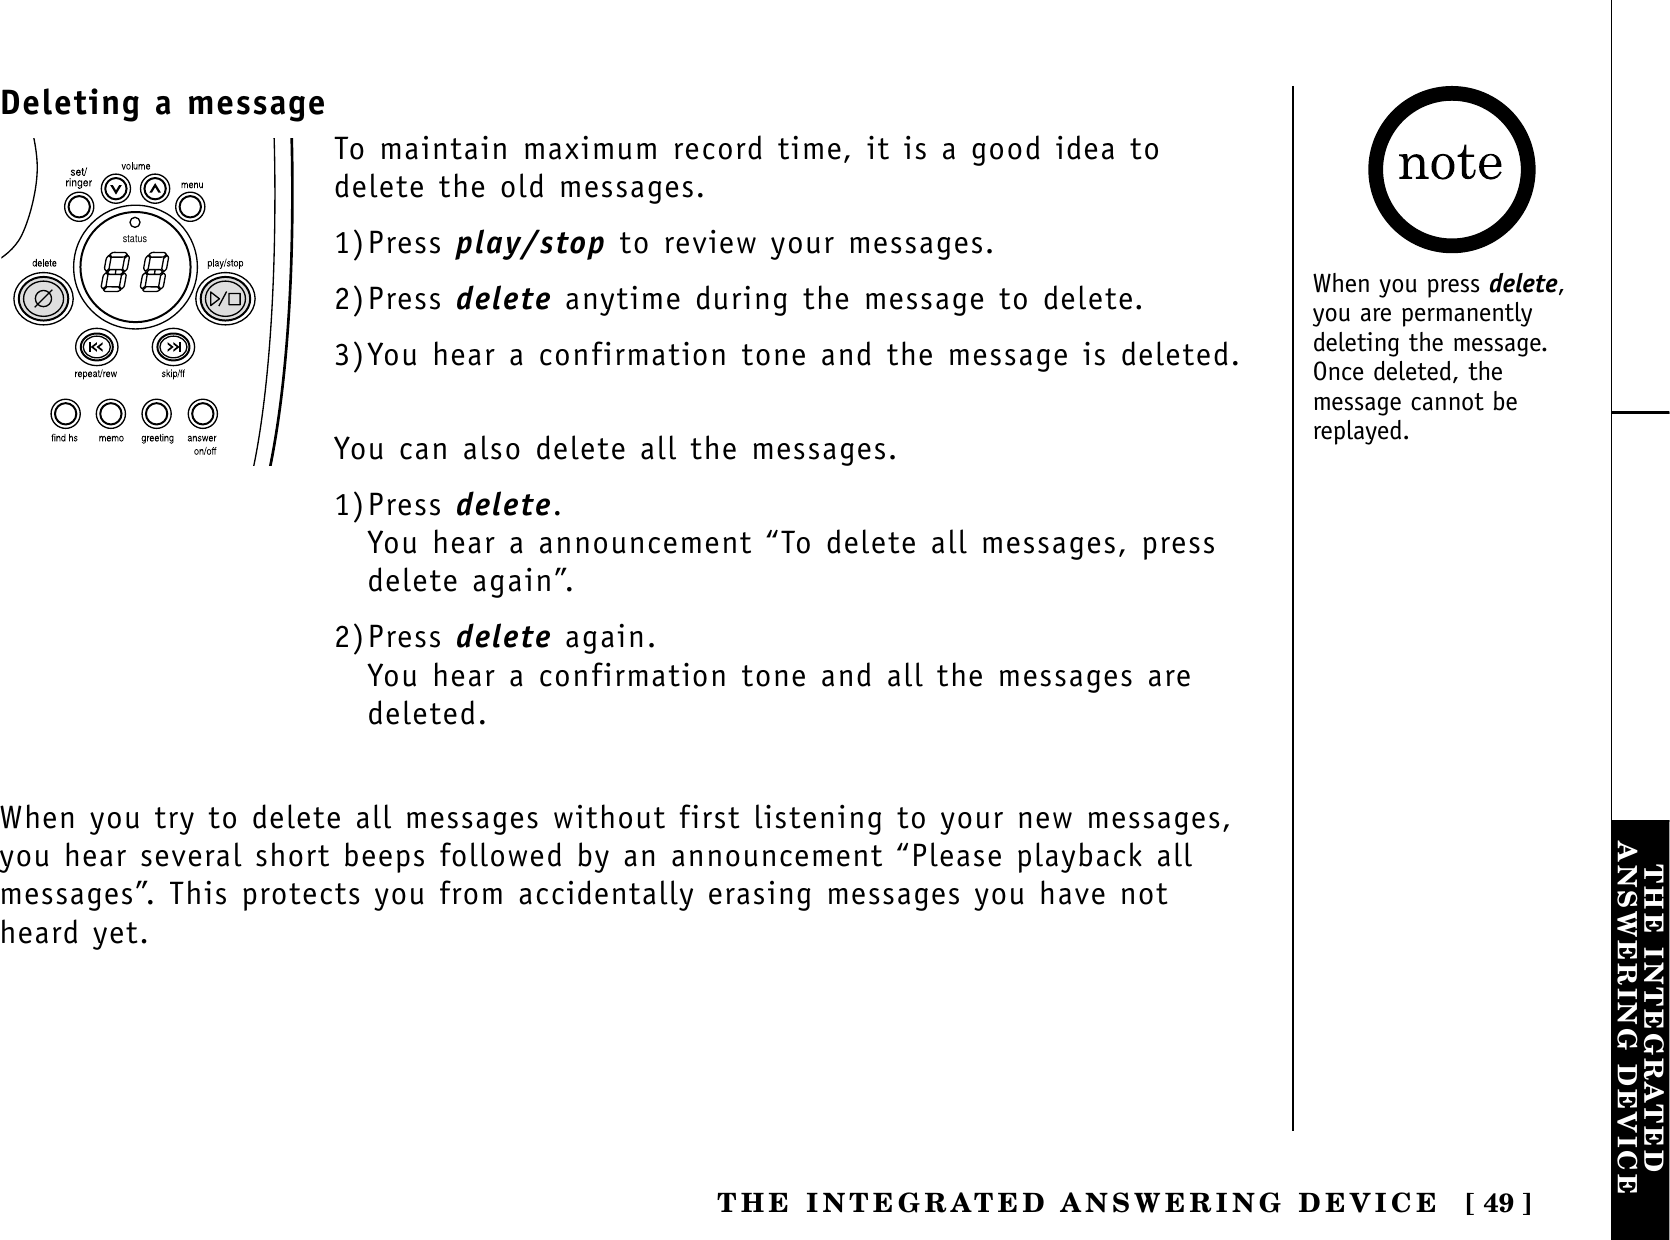 [ 49 ]THE INTEGRATEDANSWERING DEVICETHE INTEGRATED ANSWERING DEVICEDeleting a messagestatusTo maintain maximum record time, it is a good idea todelete the old messages. 1)Press play/stop to review your messages.2)Press delete anytime during the message to delete.3)You hear a confirmation tone and the message is deleted.You can also delete all the messages.1)Press delete.You hear a announcement “To delete all messages, pressdelete again”.2)Press delete again.You hear a confirmation tone and all the messages aredeleted.When you try to delete all messages without first listening to your new messages,you hear several short beeps followed by an announcement “Please playback allmessages”. This protects you from accidentally erasing messages you have notheard yet.When you press delete,you are permanentlydeleting the message.Once deleted, themessage cannot bereplayed.